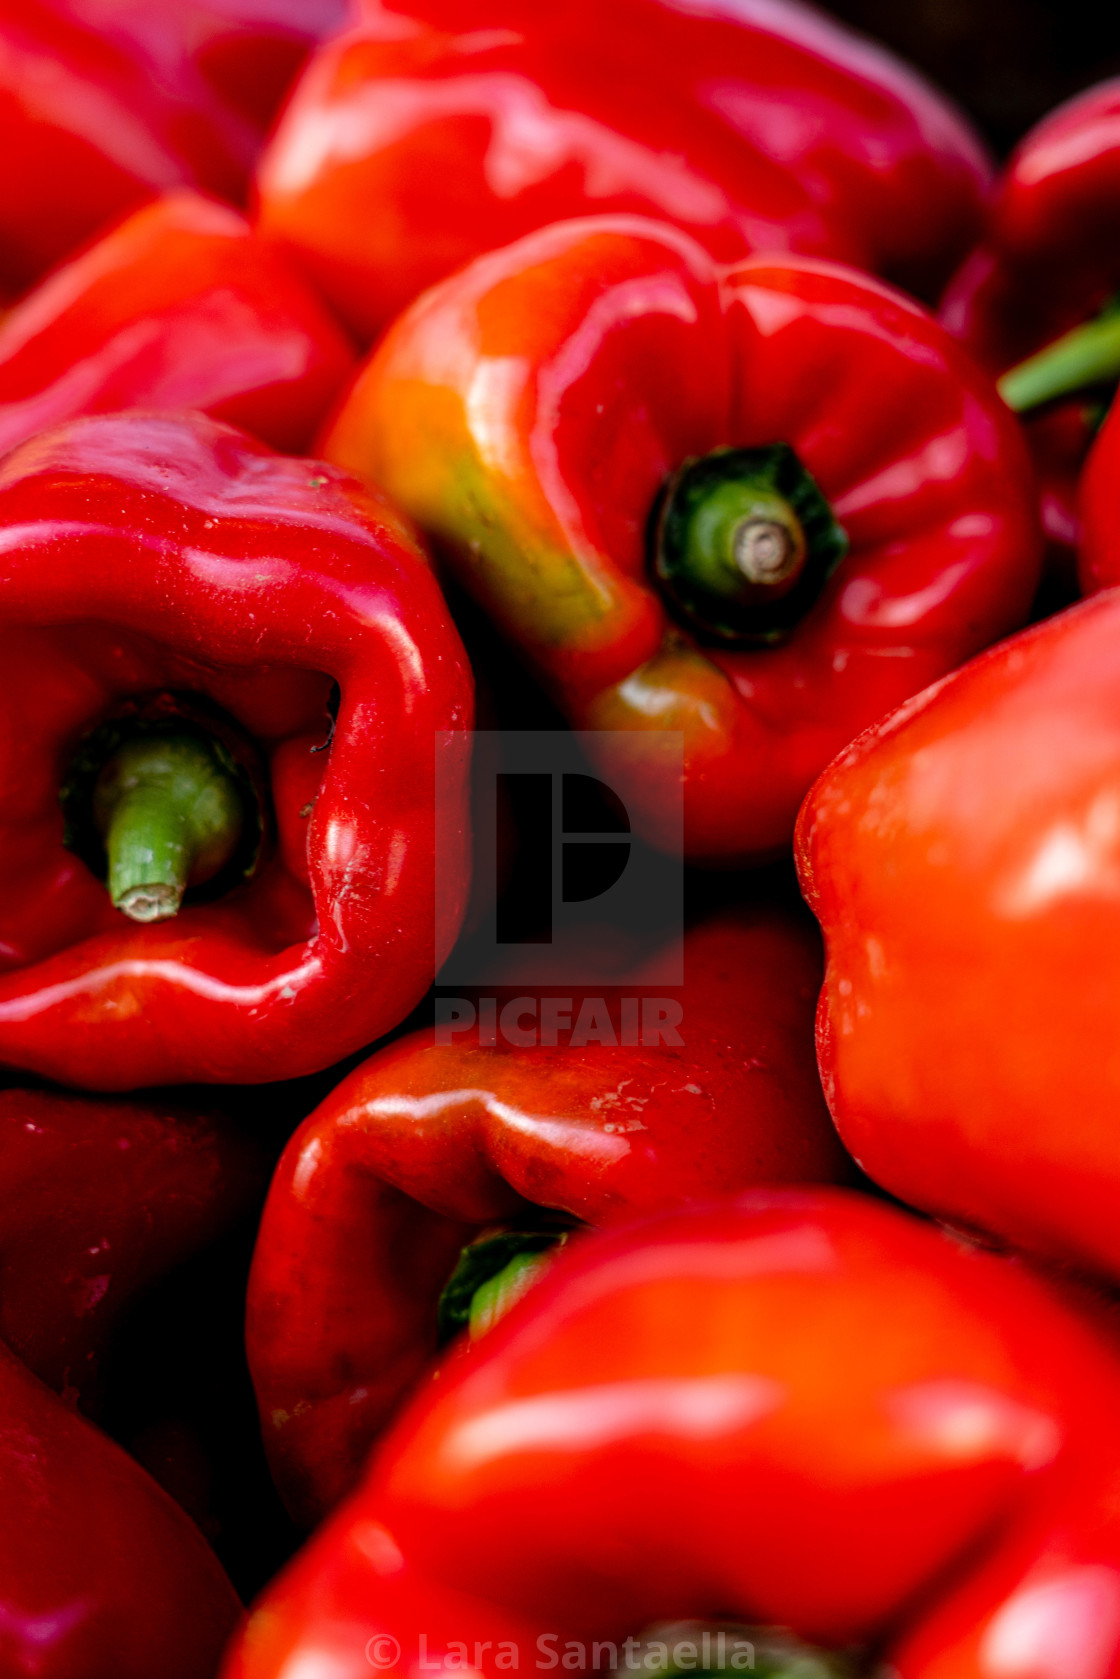 "Bell peppers" stock image